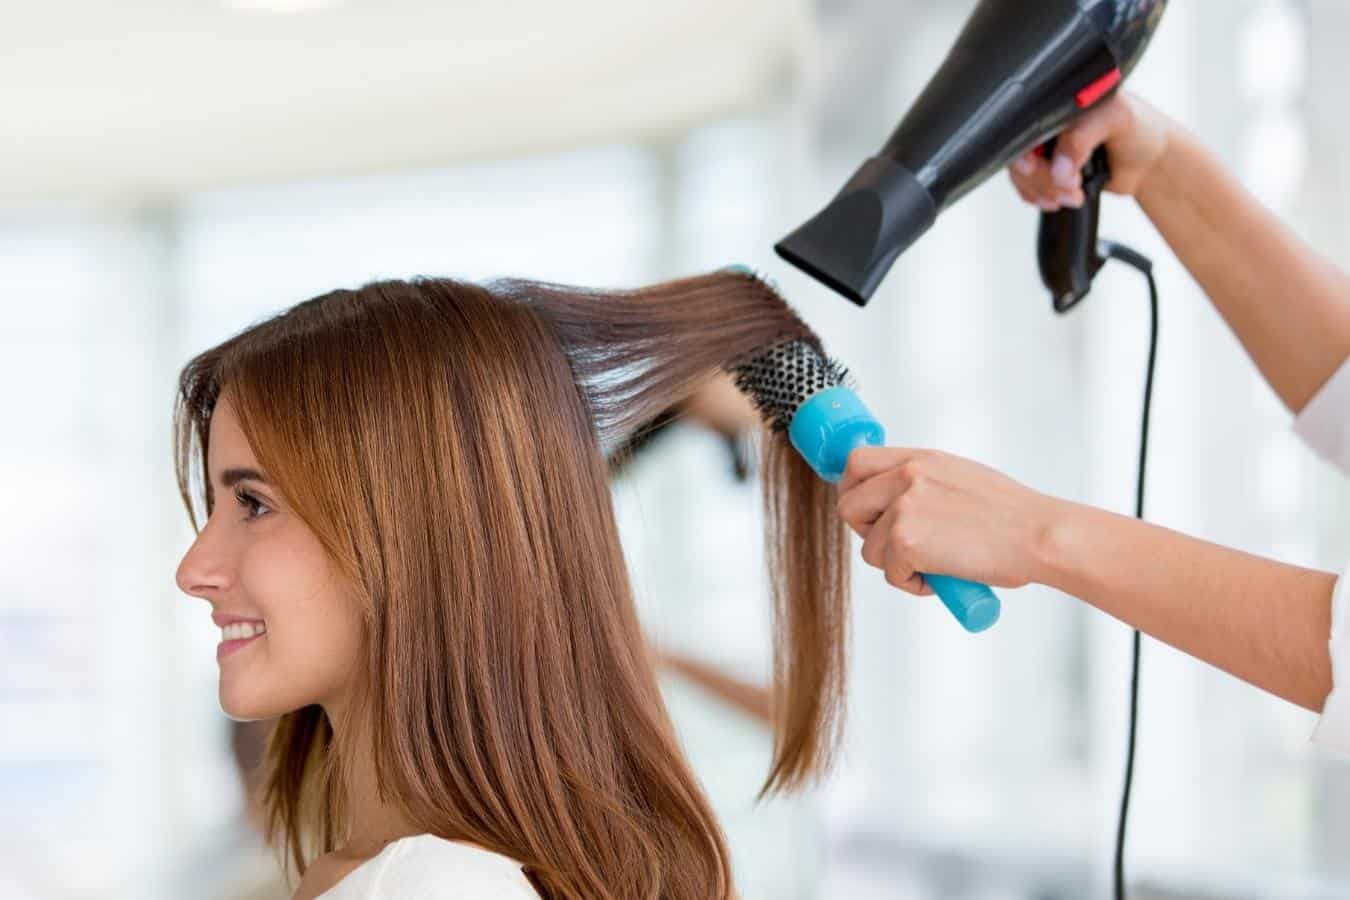 What To Look For When Purchasing A Hair Dryer